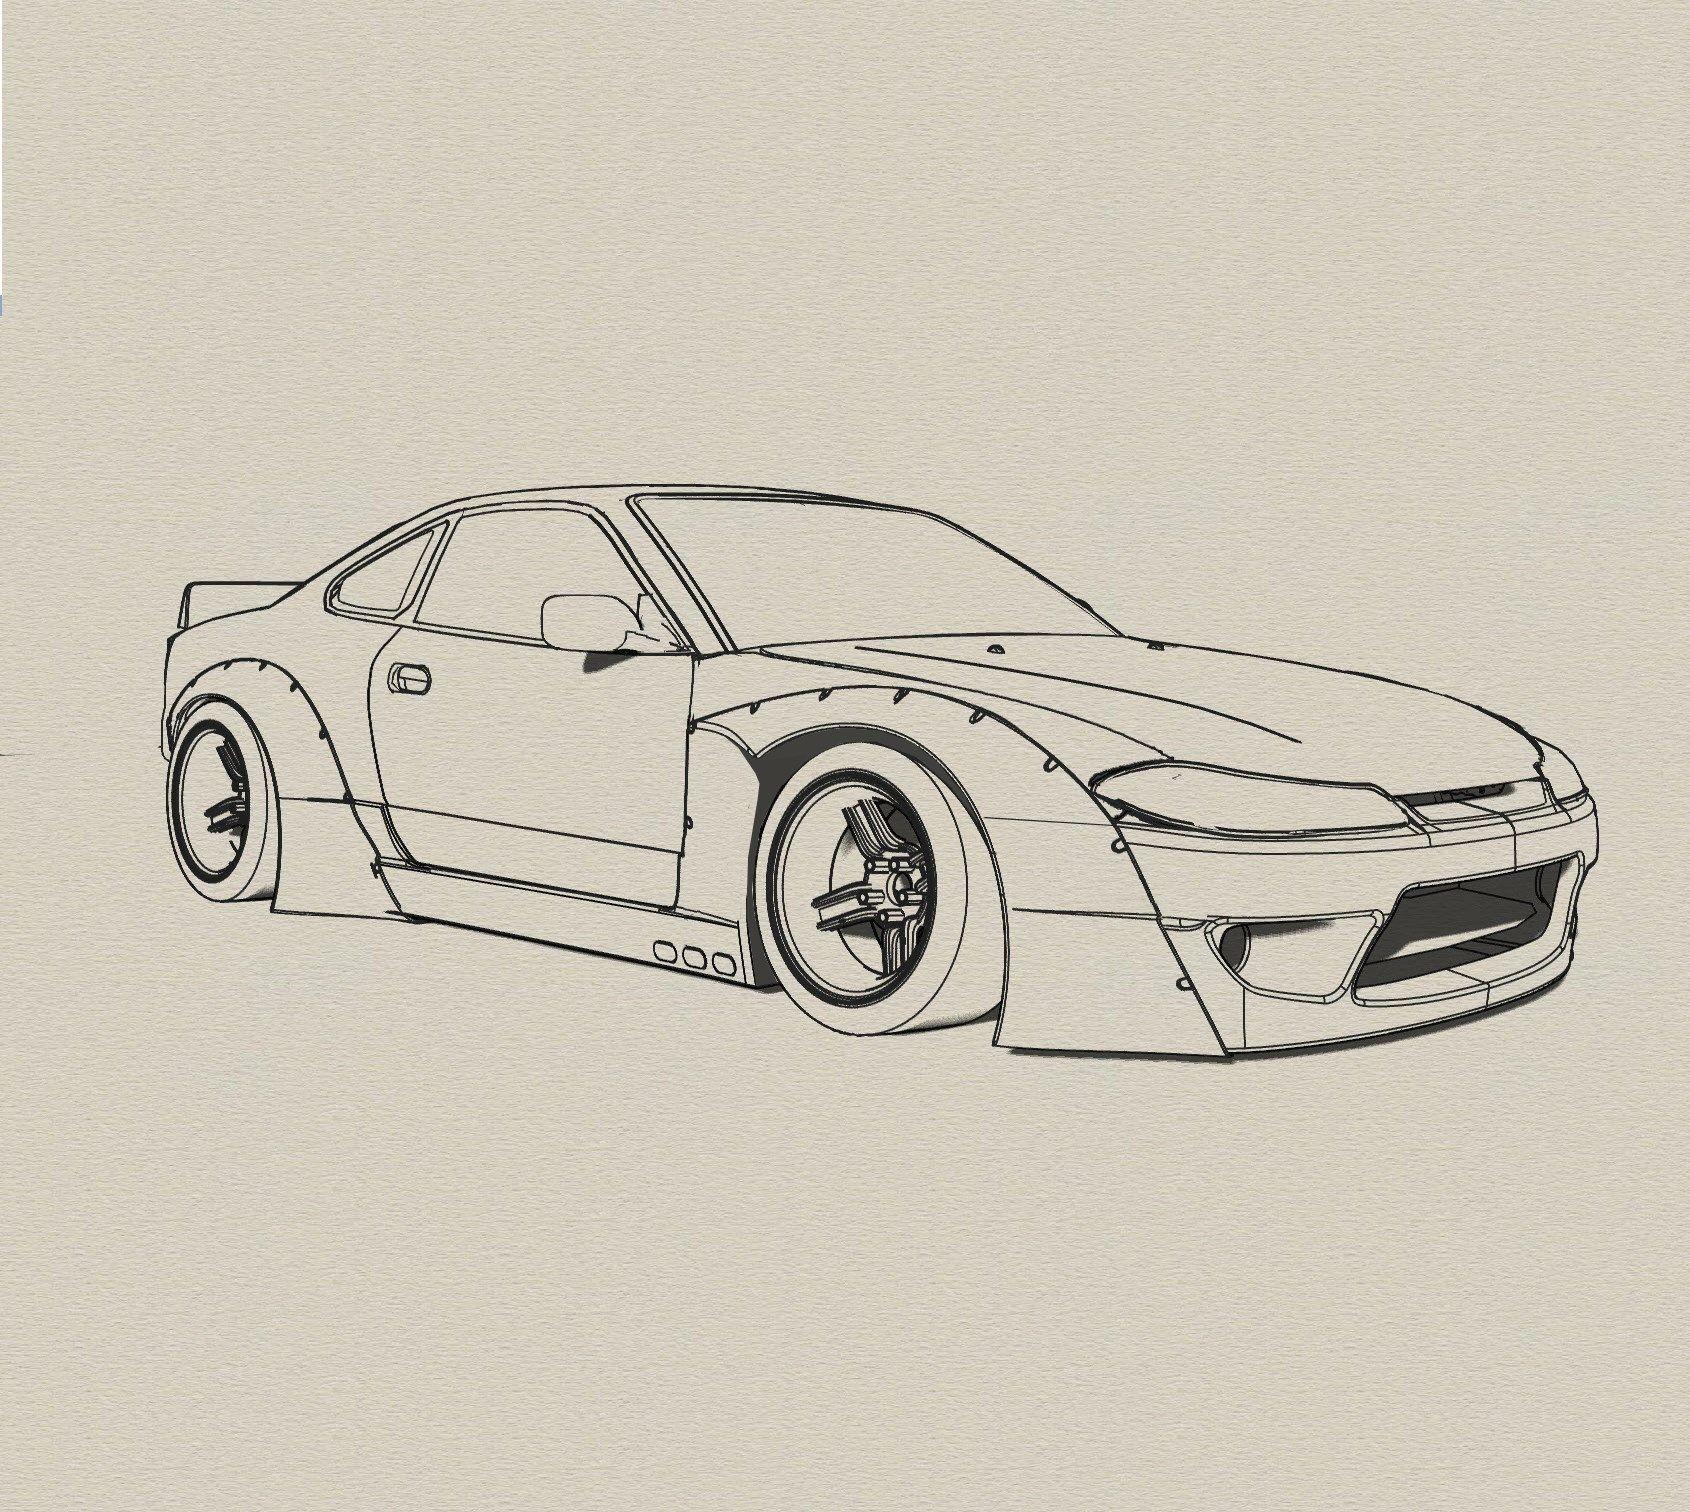 Drift Car Drawing Image That Cham Online